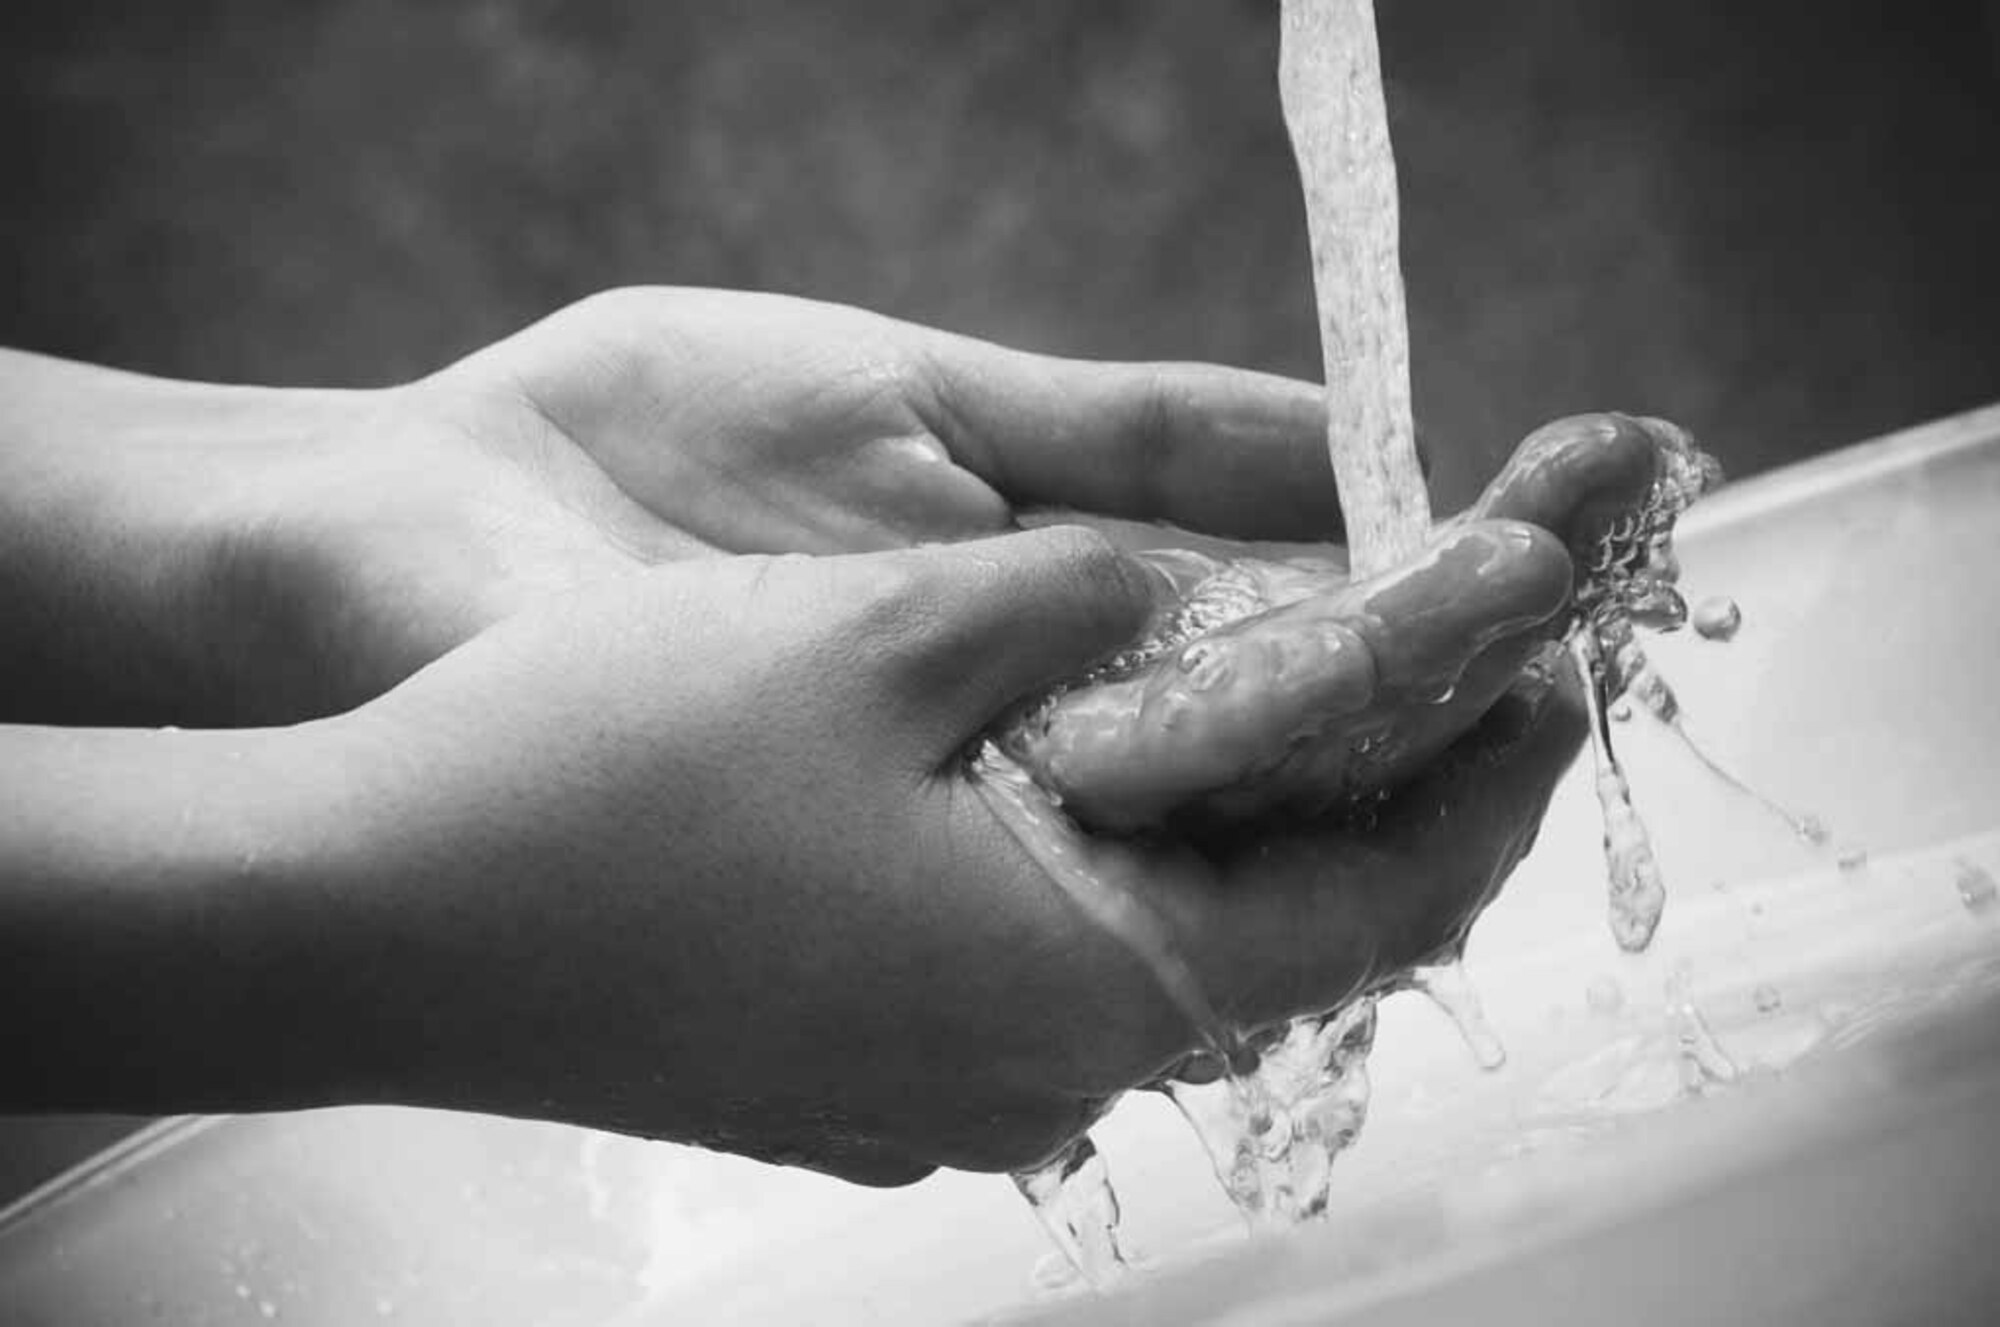 Good personal hygiene such as washing your hands before you eat can go a long way in preventing illness. (Courtesy photo)